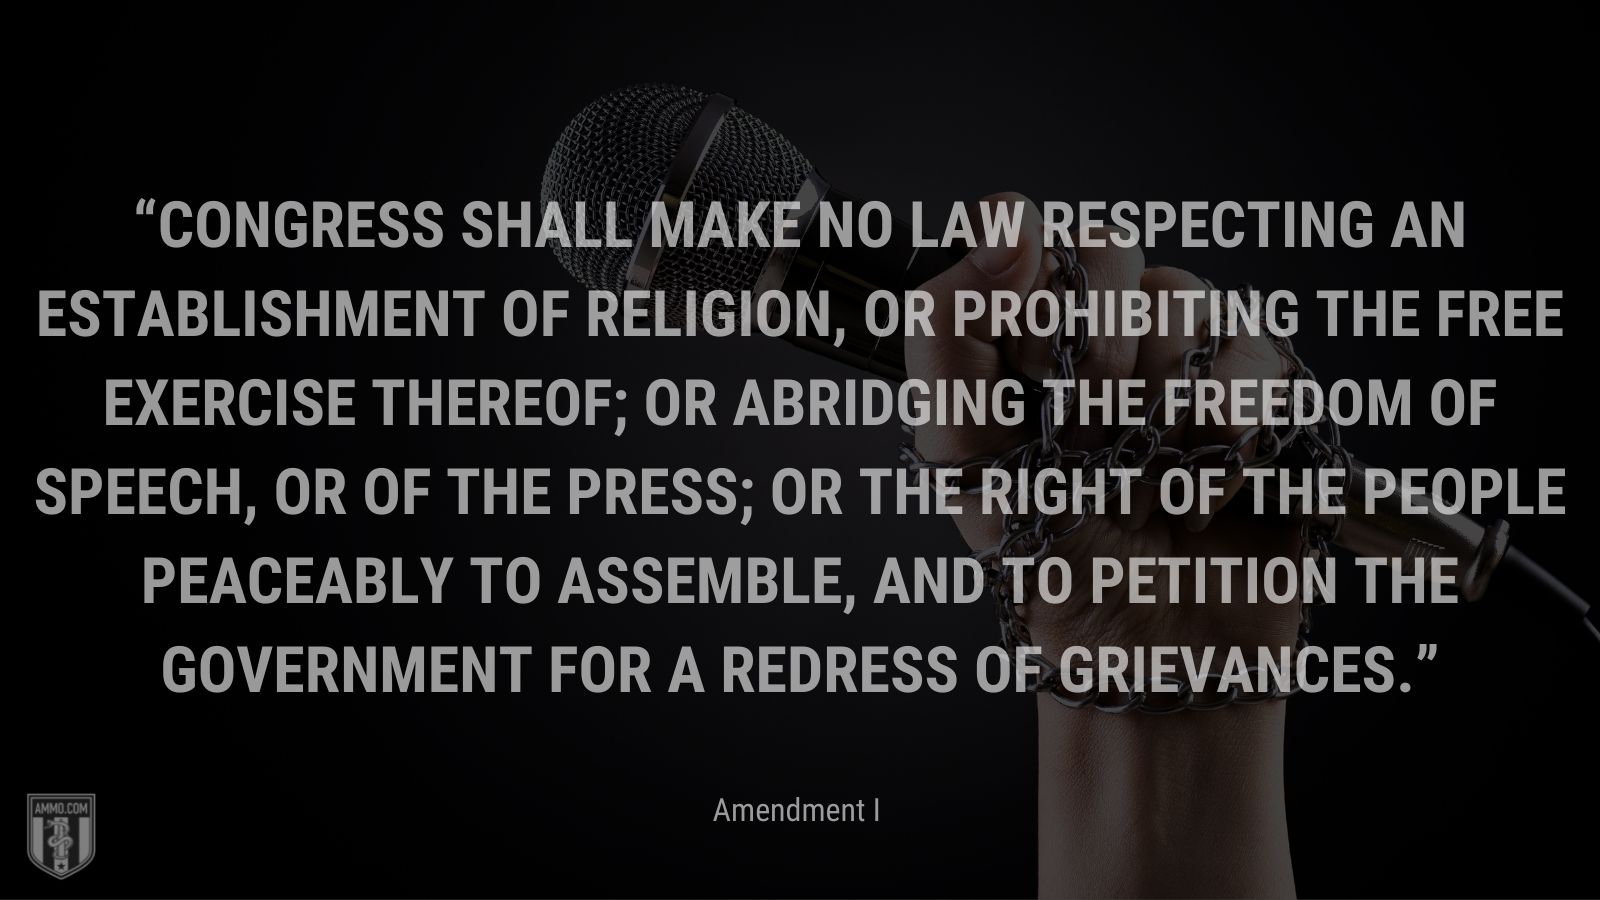 “Congress shall make no law respecting an establishment of religion, or prohibiting the free exercise thereof; or abridging the freedom of speech, or of the press; or the right of the people peaceably to assemble, and to petition the Government for a redress of grievances.” - Amendment I